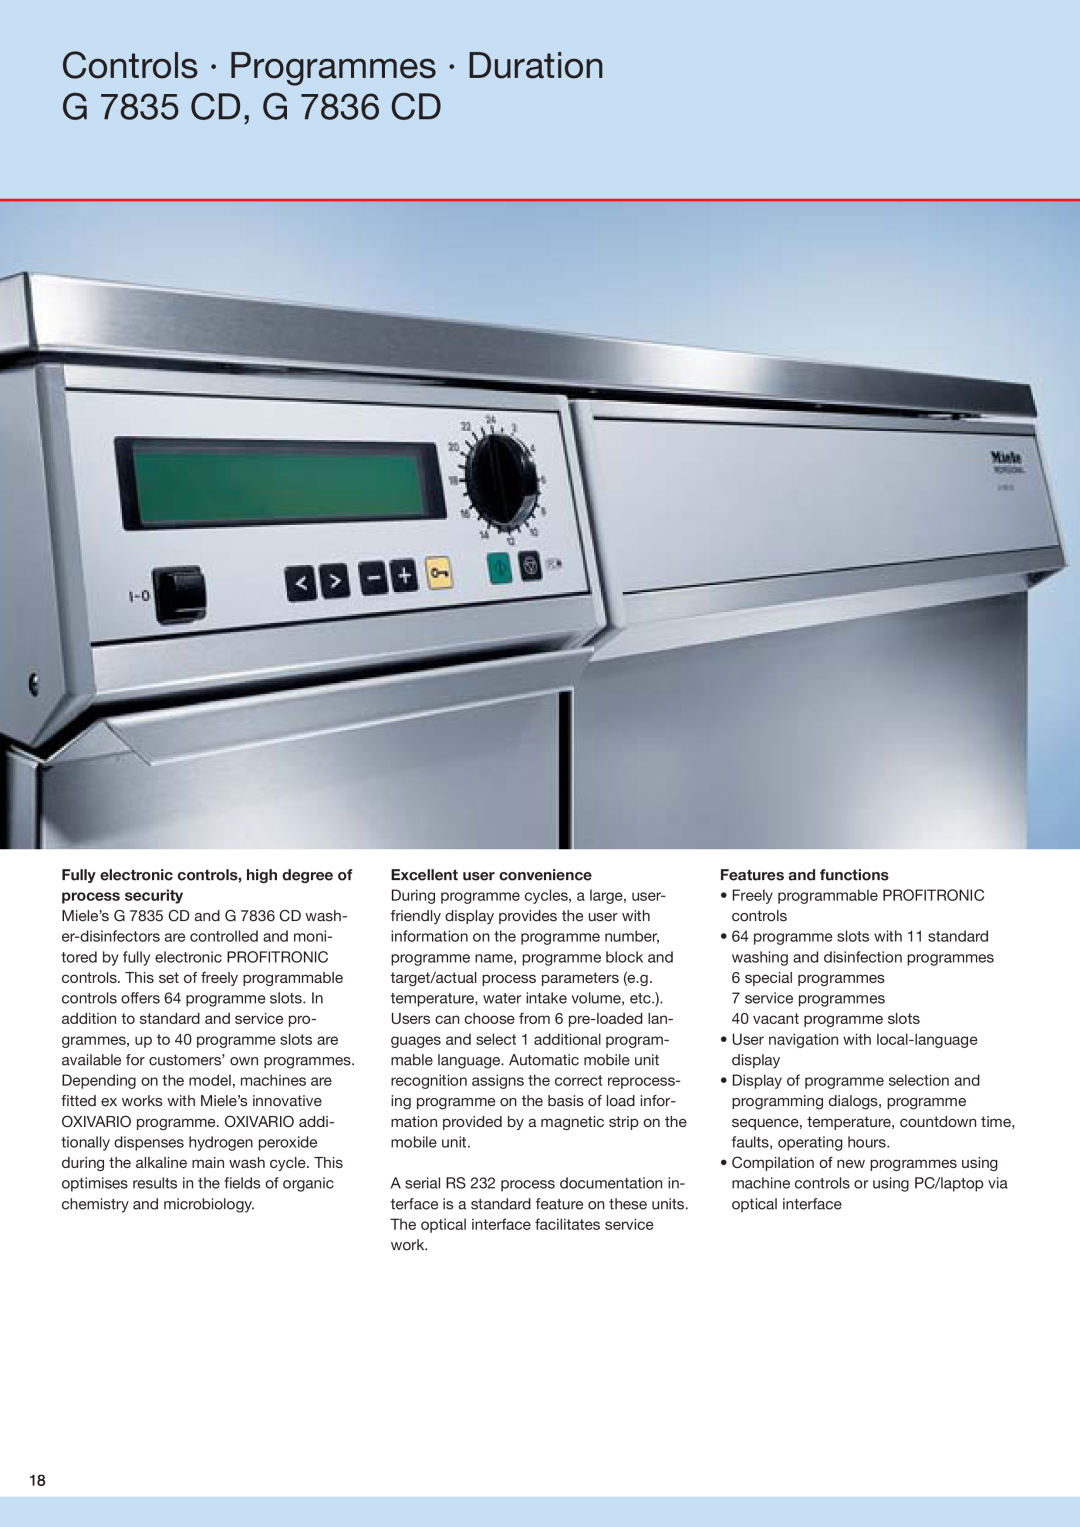 Miele G 7883, G 7836 manual Excellent user convenience, Features and functions 